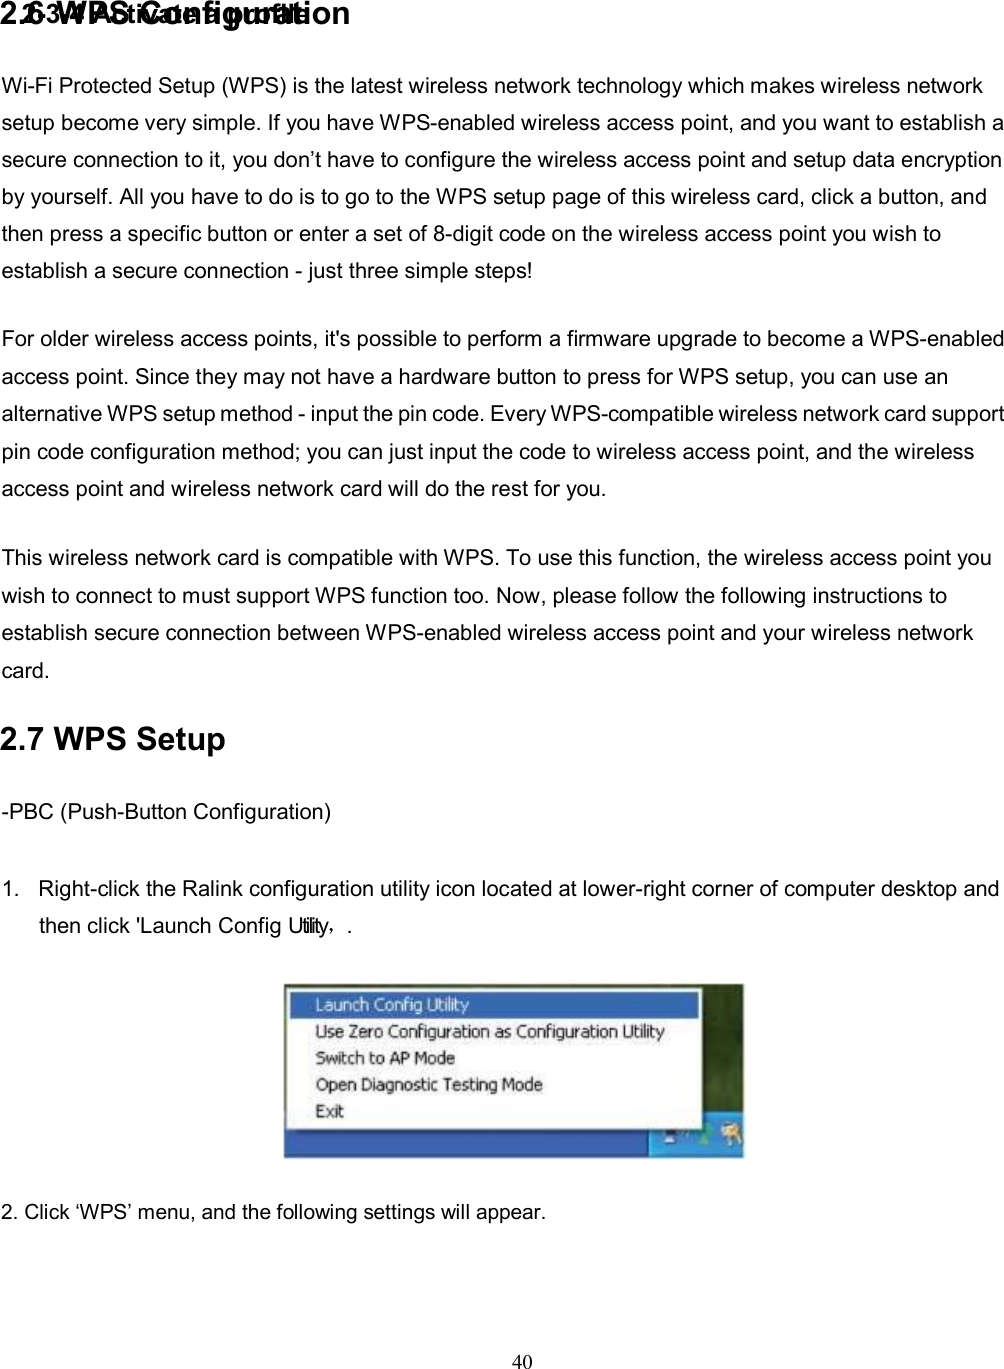 2-3-4 Activate a profile 40  2. Click ‘WPS’ menu, and the following settings will appear. 2.6 WPS Configuration Wi-Fi Protected Setup (WPS) is the latest wireless network technology which makes wireless network setup become very simple. If you have WPS-enabled wireless access point, and you want to establish a secure connection to it, you don’t have to configure the wireless access point and setup data encryption by yourself. All you have to do is to go to the WPS setup page of this wireless card, click a button, and then press a specific button or enter a set of 8-digit code on the wireless access point you wish to establish a secure connection - just three simple steps! For older wireless access points, it&apos;s possible to perform a firmware upgrade to become a WPS-enabled access point. Since they may not have a hardware button to press for WPS setup, you can use an alternative WPS setup method - input the pin code. Every WPS-compatible wireless network card support pin code configuration method; you can just input the code to wireless access point, and the wireless access point and wireless network card will do the rest for you. This wireless network card is compatible with WPS. To use this function, the wireless access point you wish to connect to must support WPS function too. Now, please follow the following instructions to establish secure connection between WPS-enabled wireless access point and your wireless network card. 2.7 WPS Setup   -PBC (Push-Button Configuration) 1.  Right-click the Ralink configuration utility icon located at lower-right corner of computer desktop and then click &apos;Launch Config Utility，.  